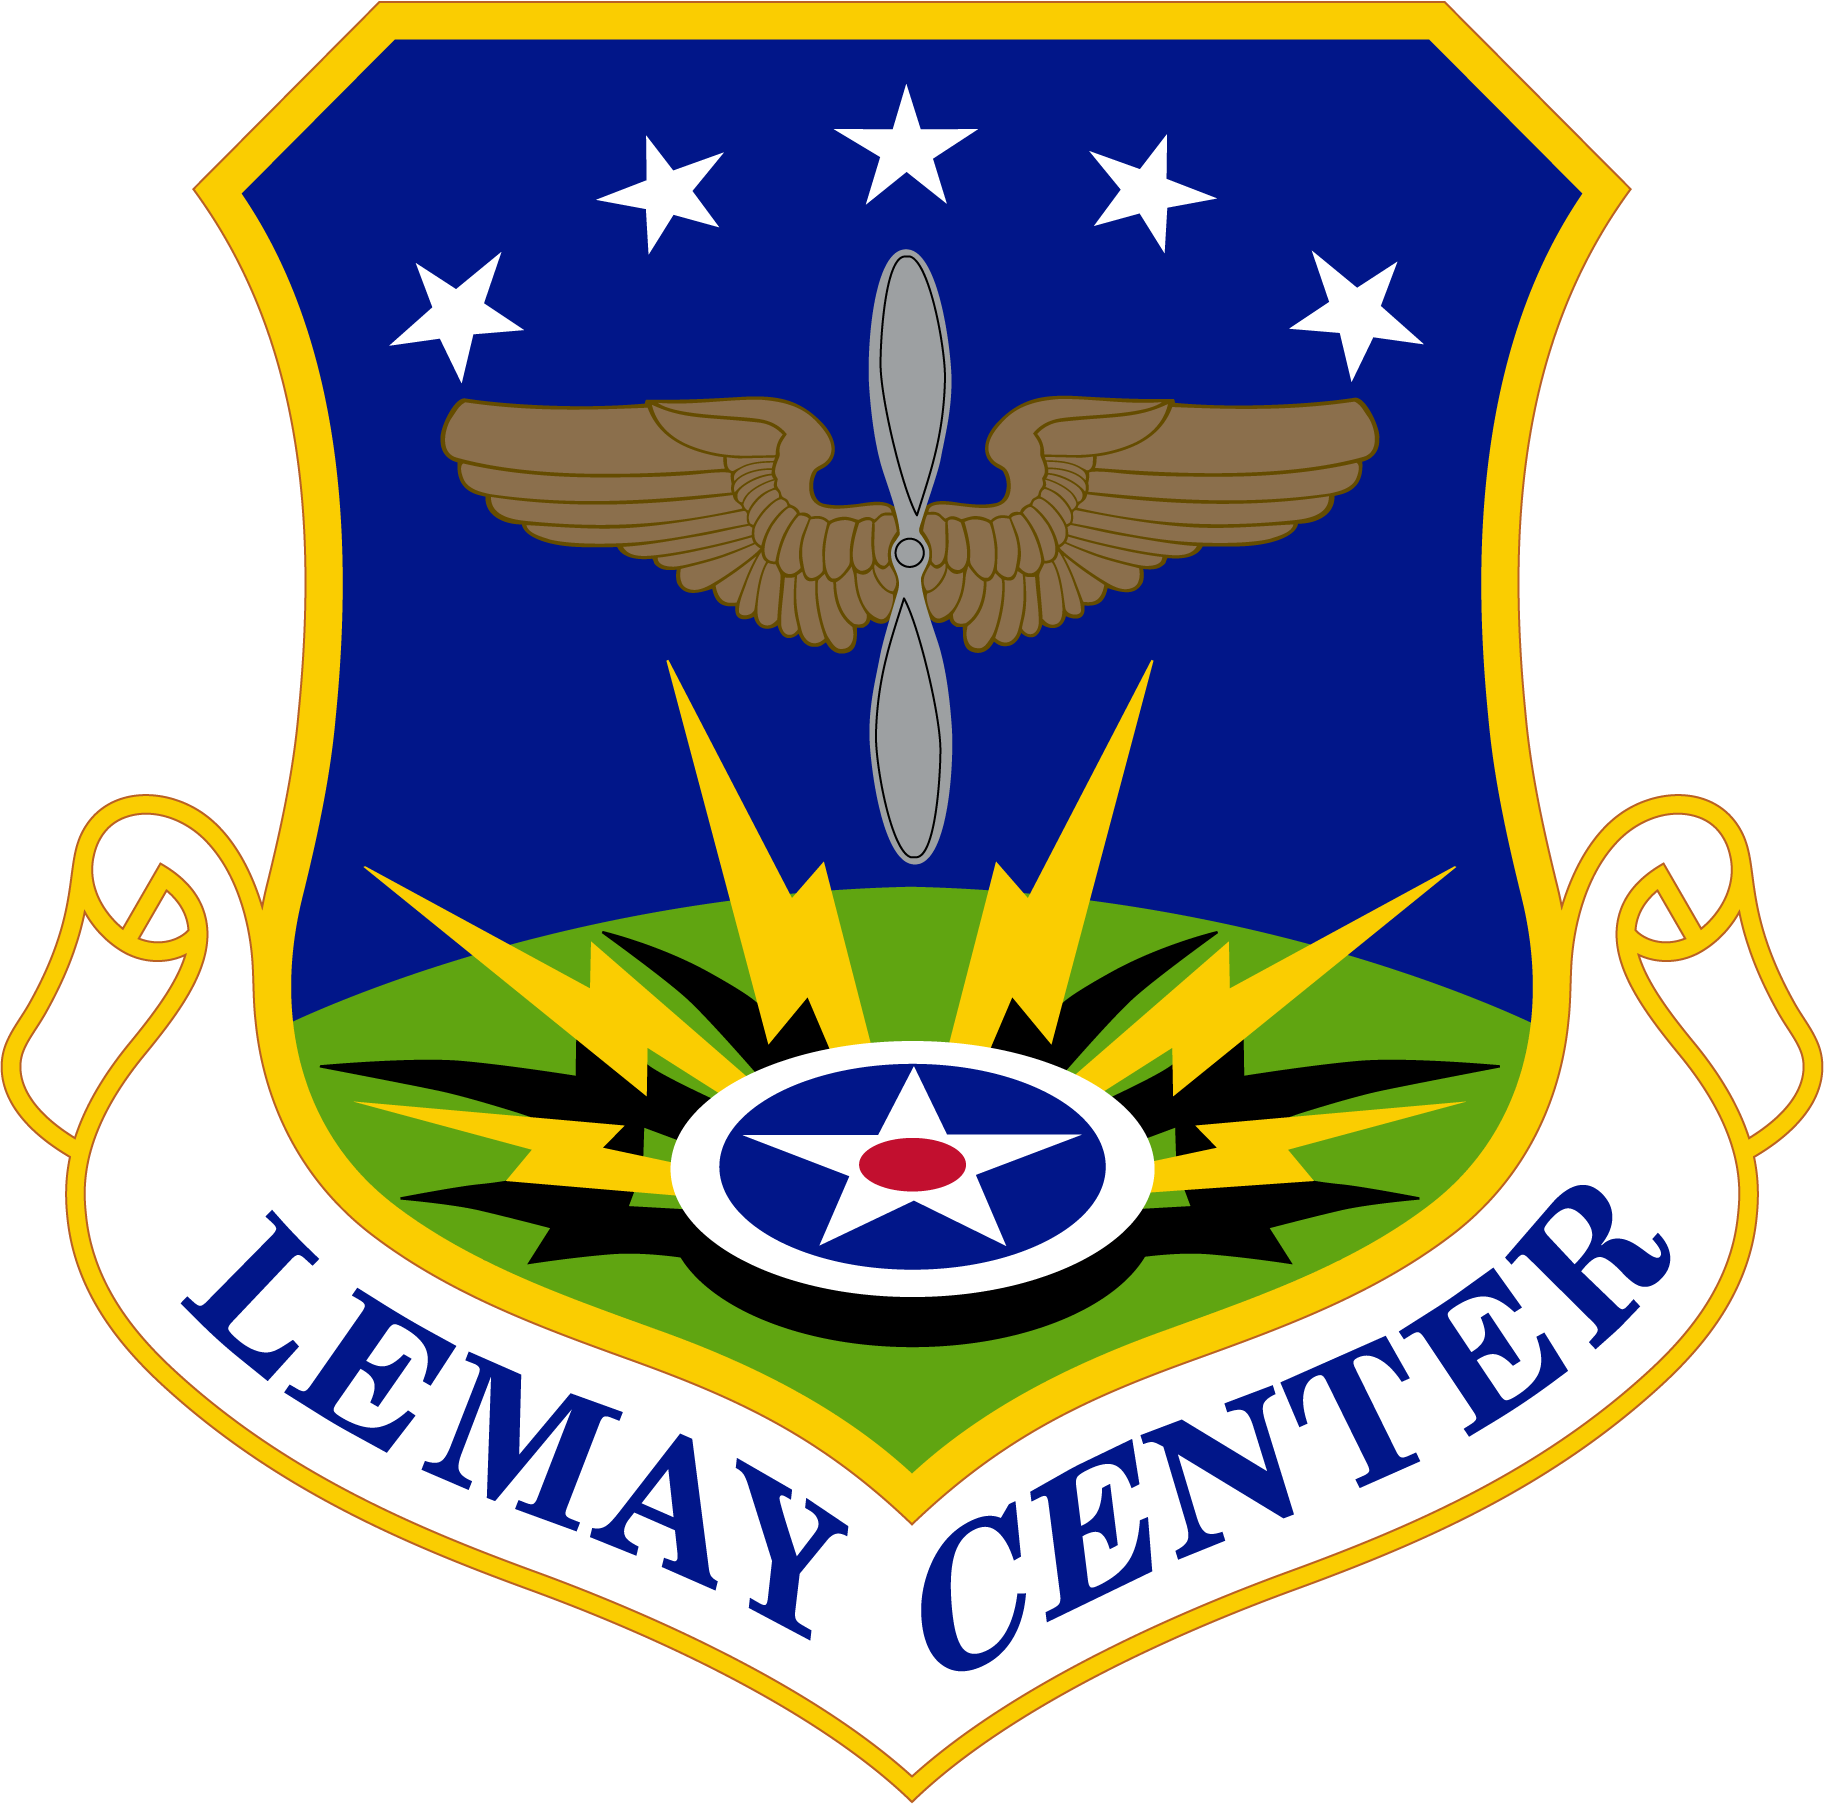 LeMay Center Shield